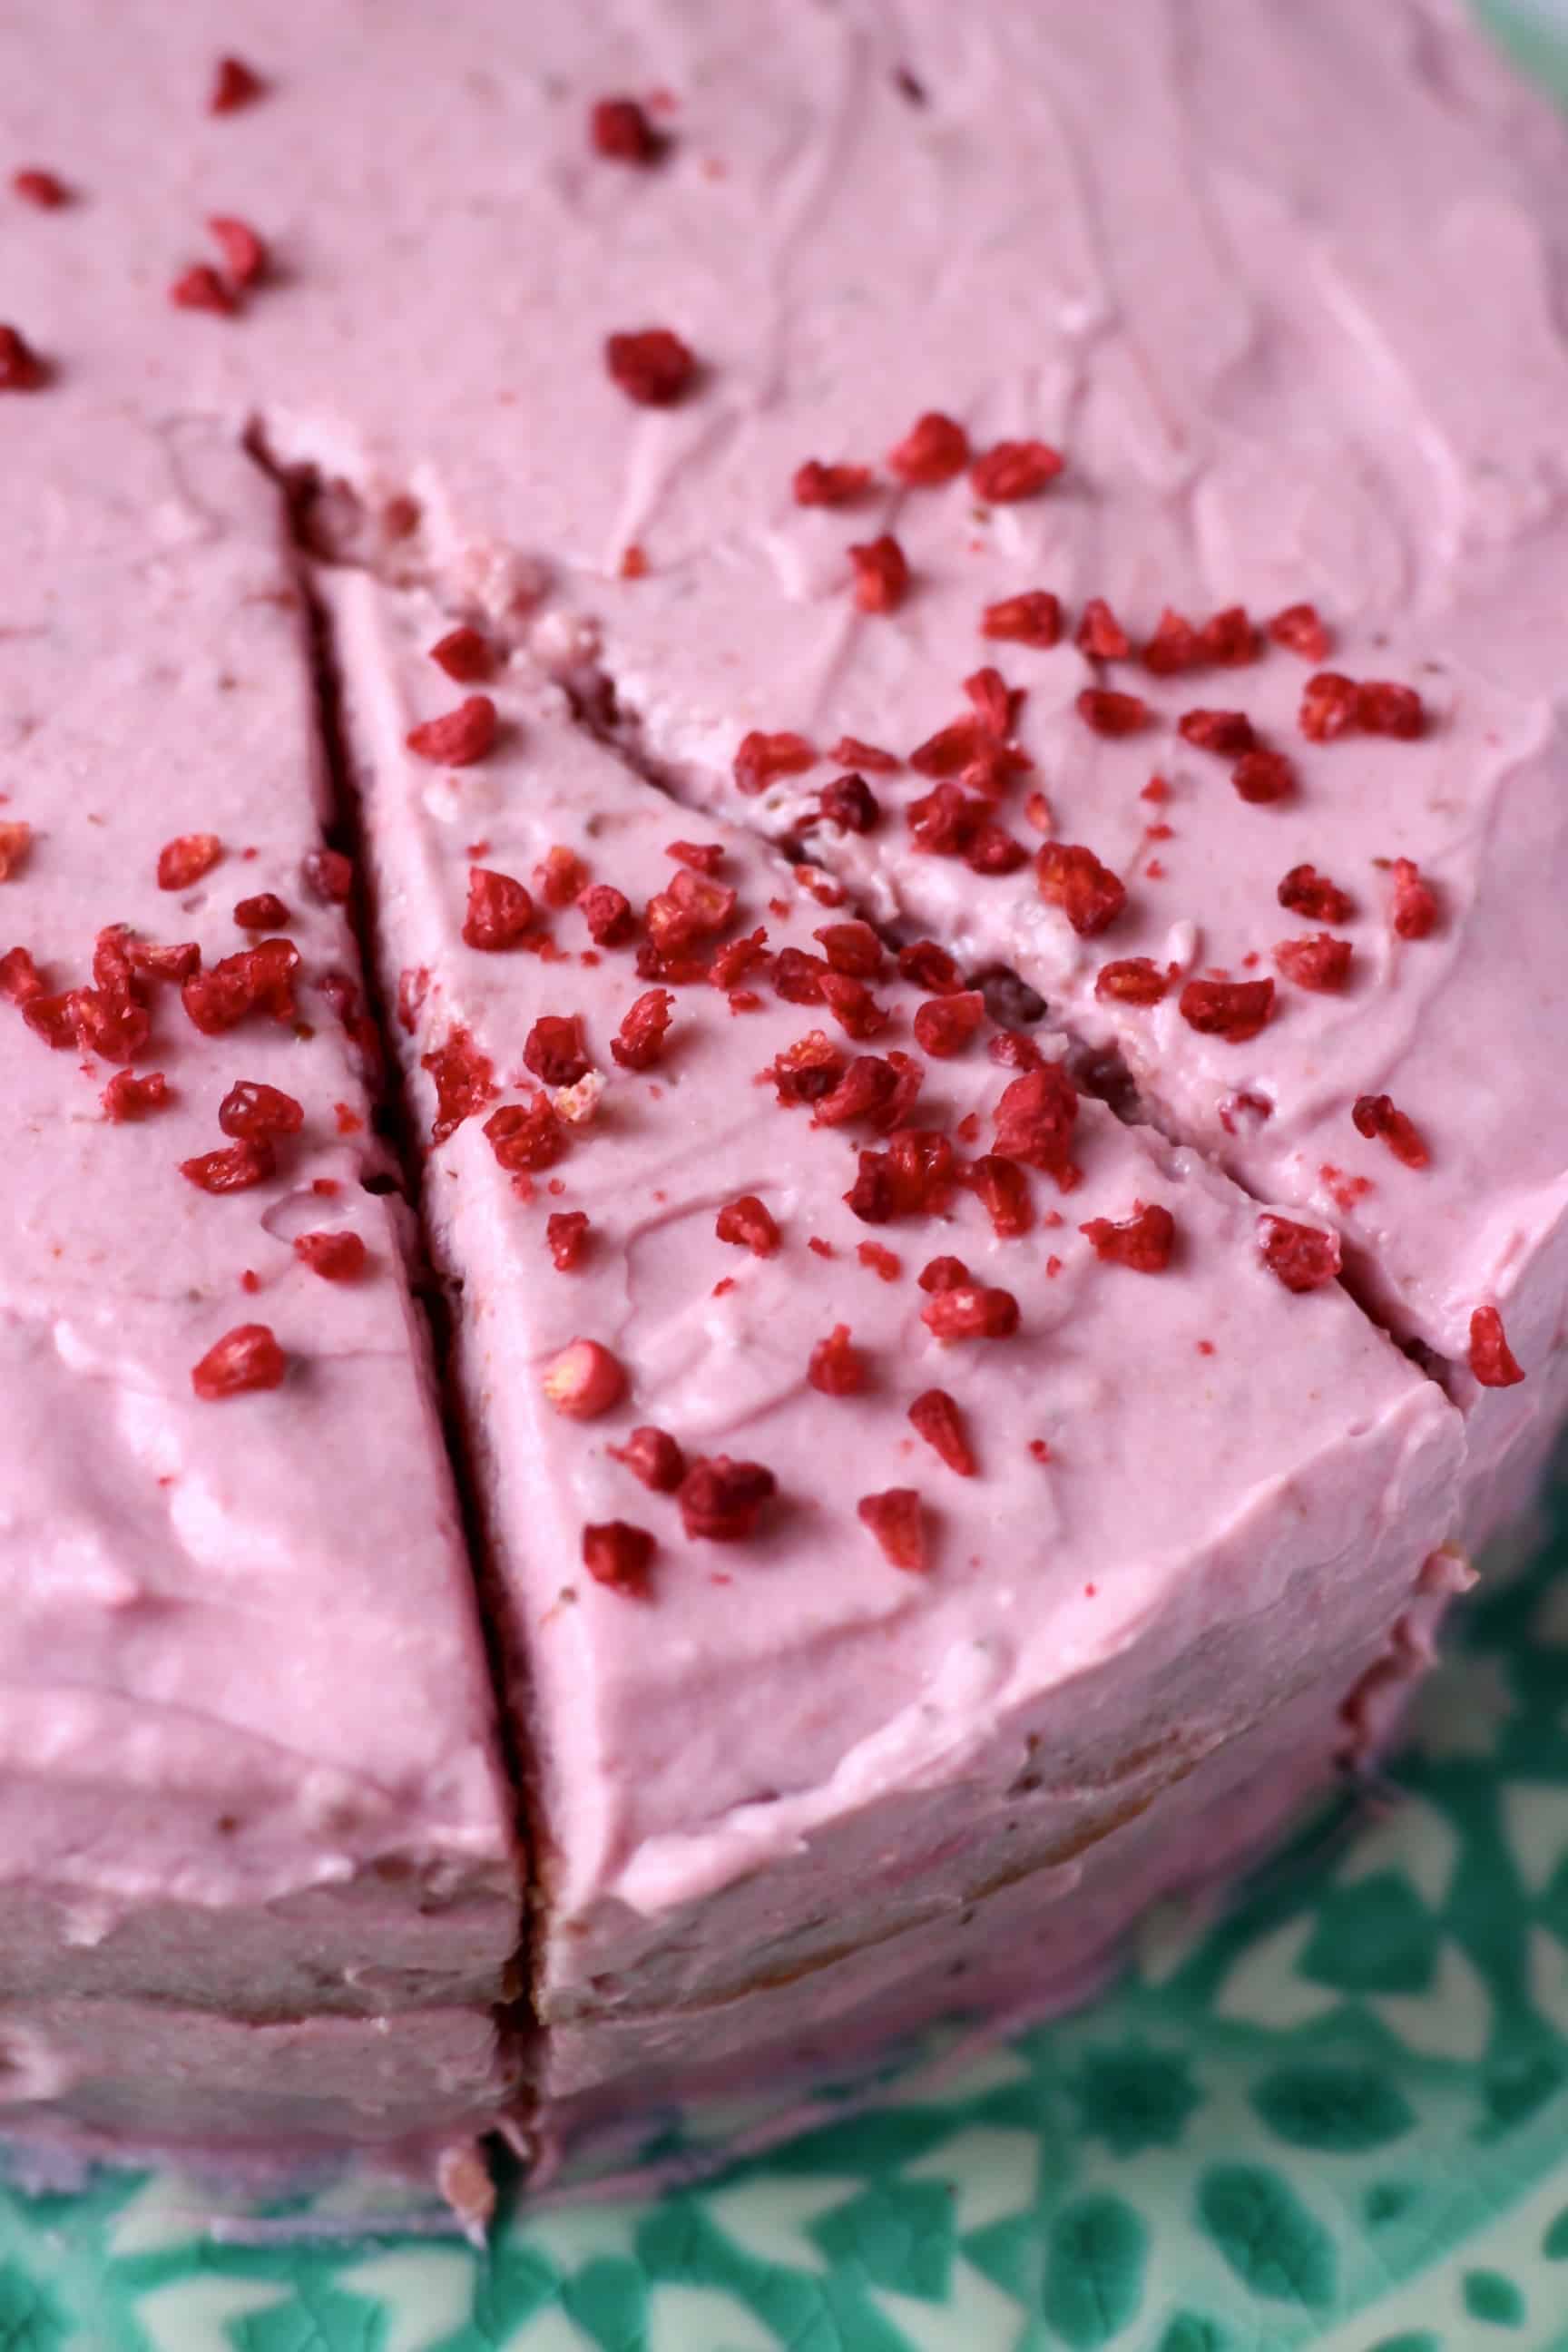 A pink gluten-free vegan strawberry cake with pink strawberry frosting with a slice cut 